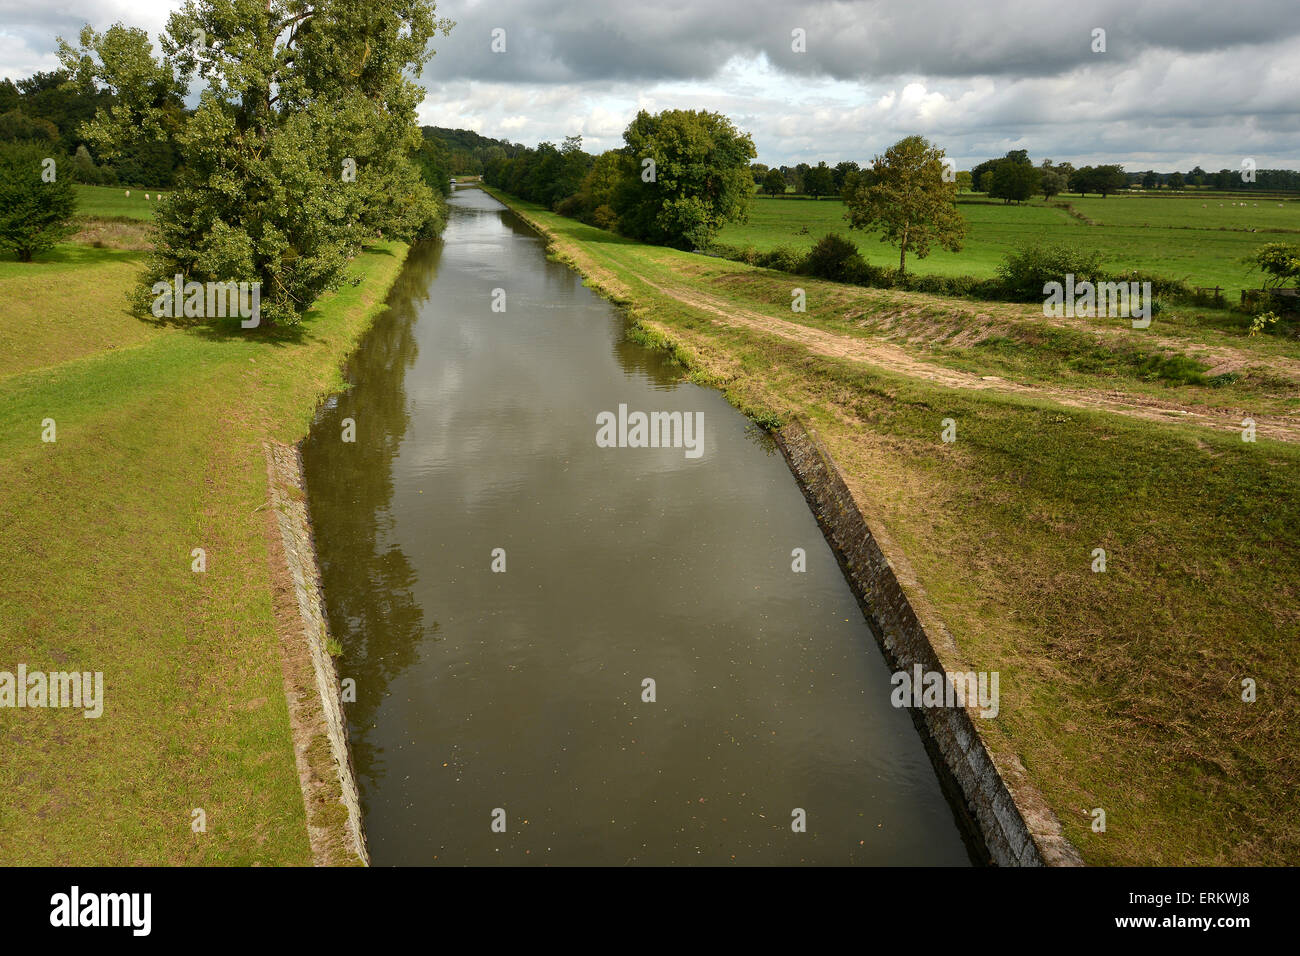 Digoin canal, Chambilly, Saône et Loire, Bourgogne, France, Europe Banque D'Images